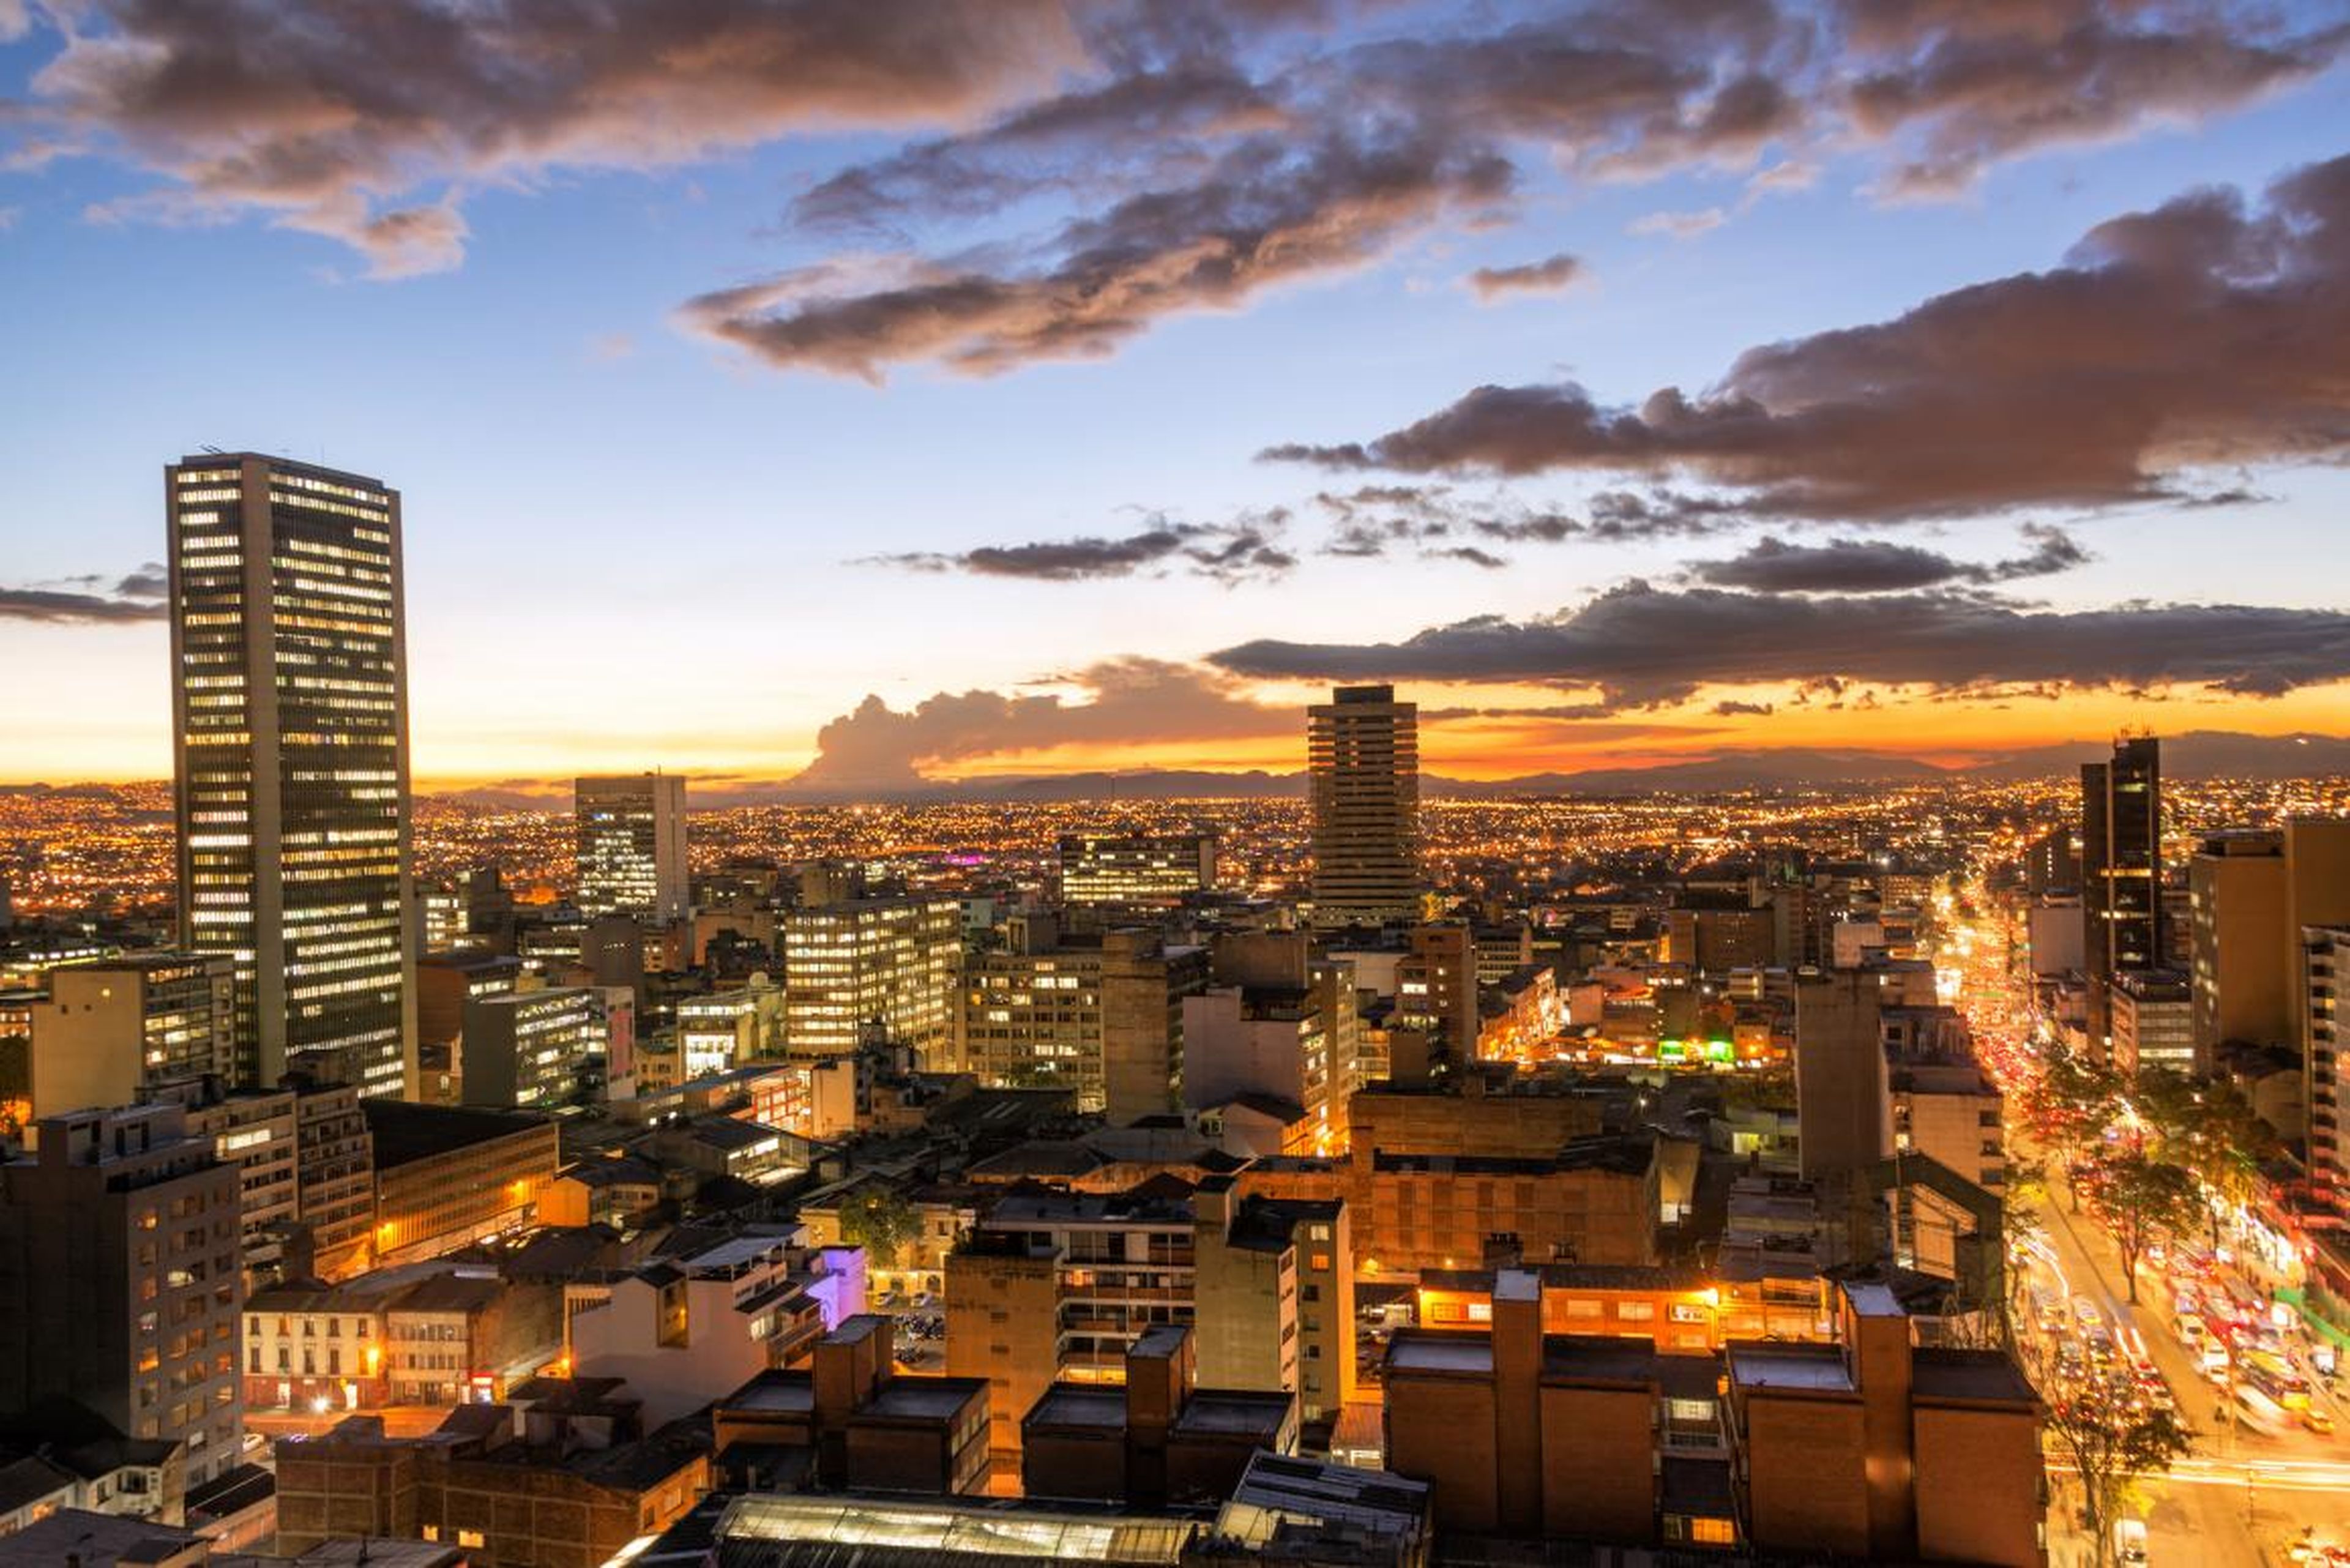 6. More than 10 million people in Colombia call the city of Bogota home.